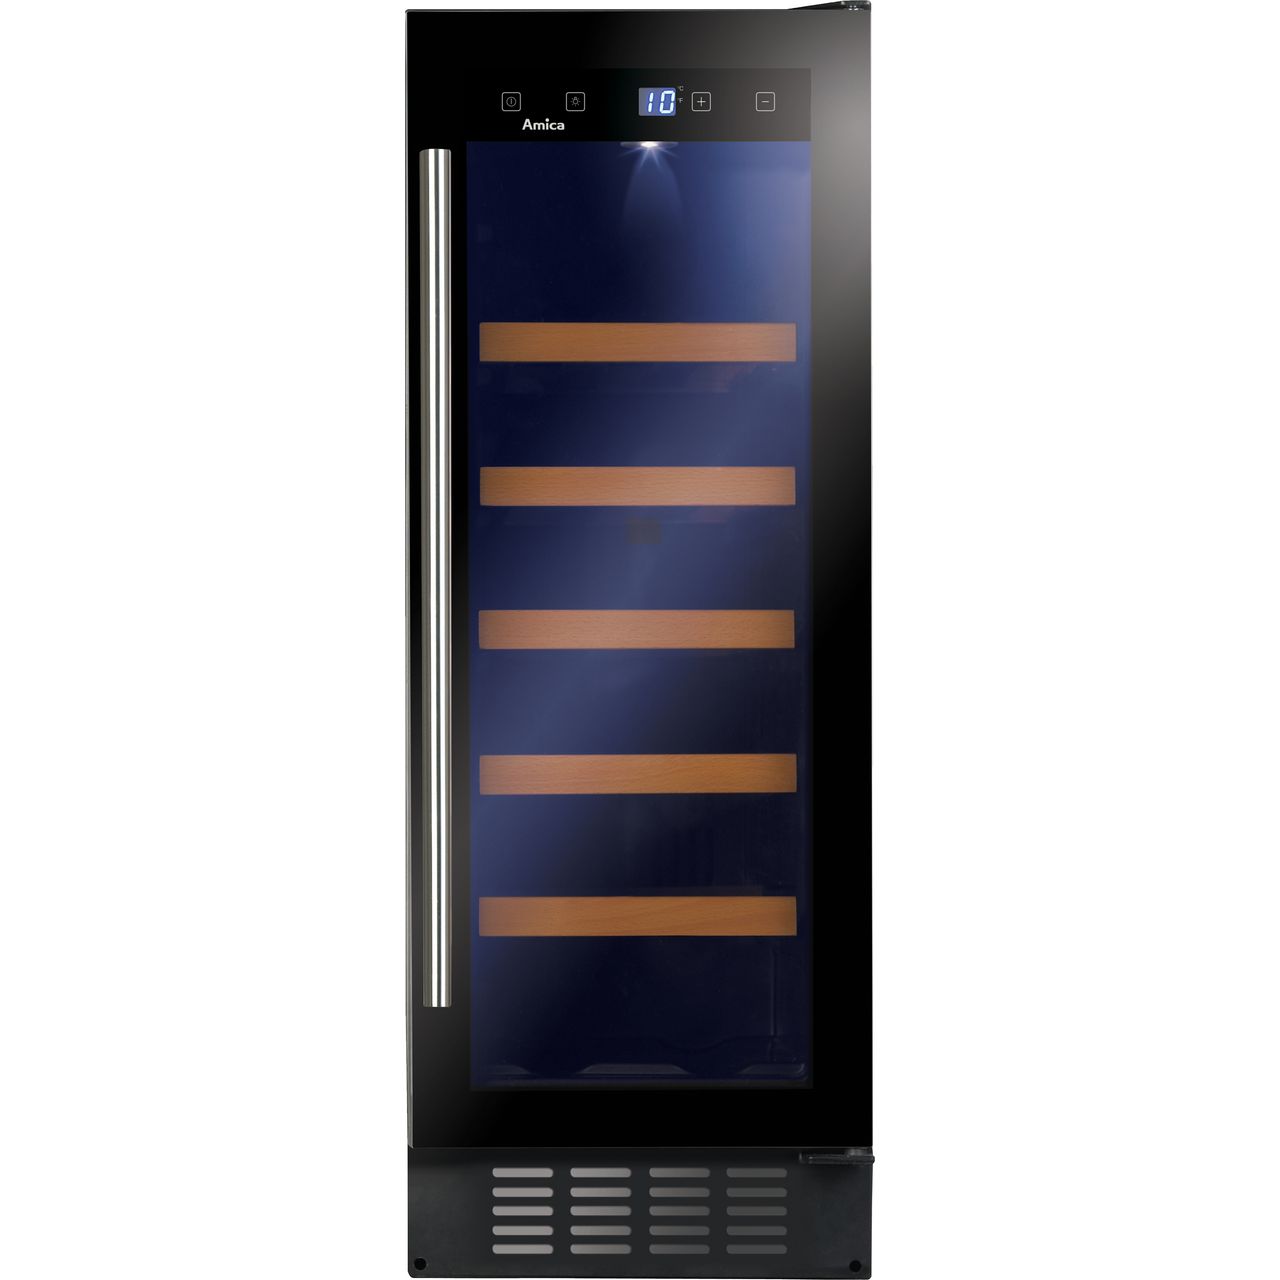 Amica AWC301BL Wine Cooler Review